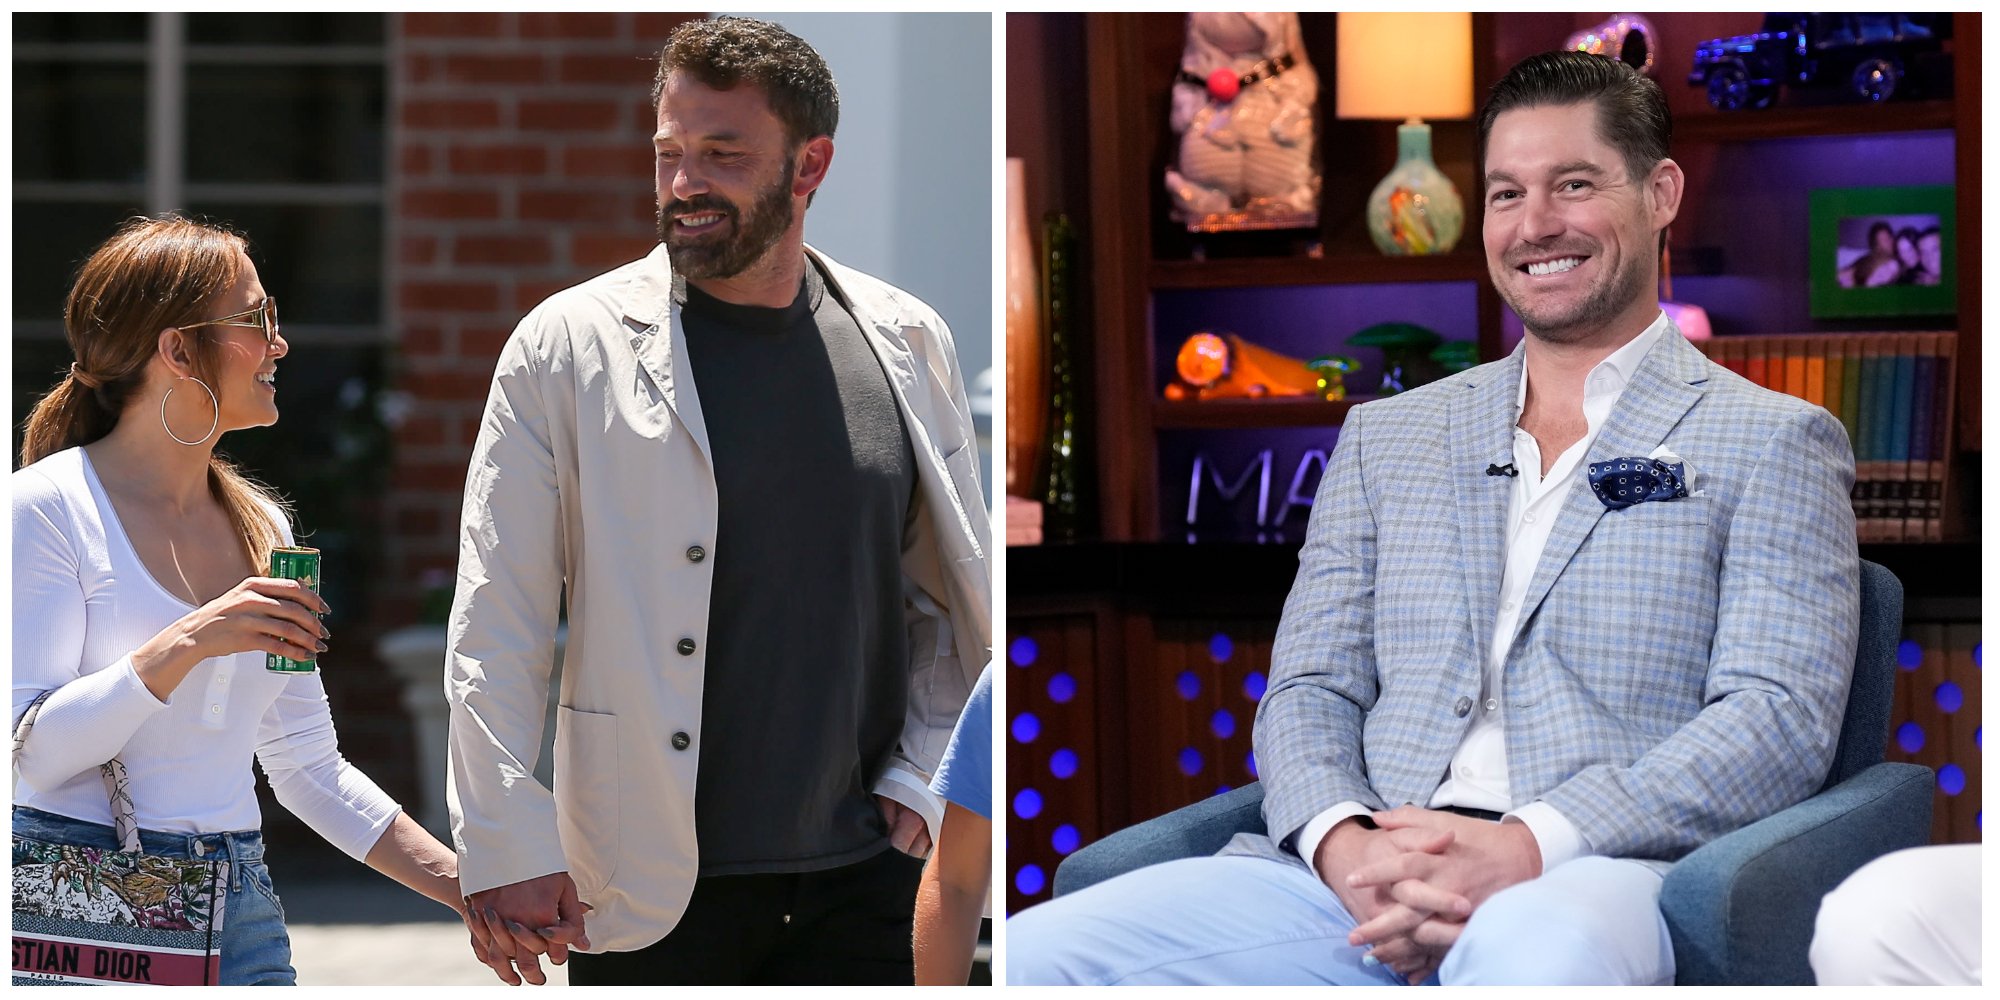 Jennifer Lopez and Ben Affleck walk down the street holding hands. Craig Conover smiles while at 'WWHL'